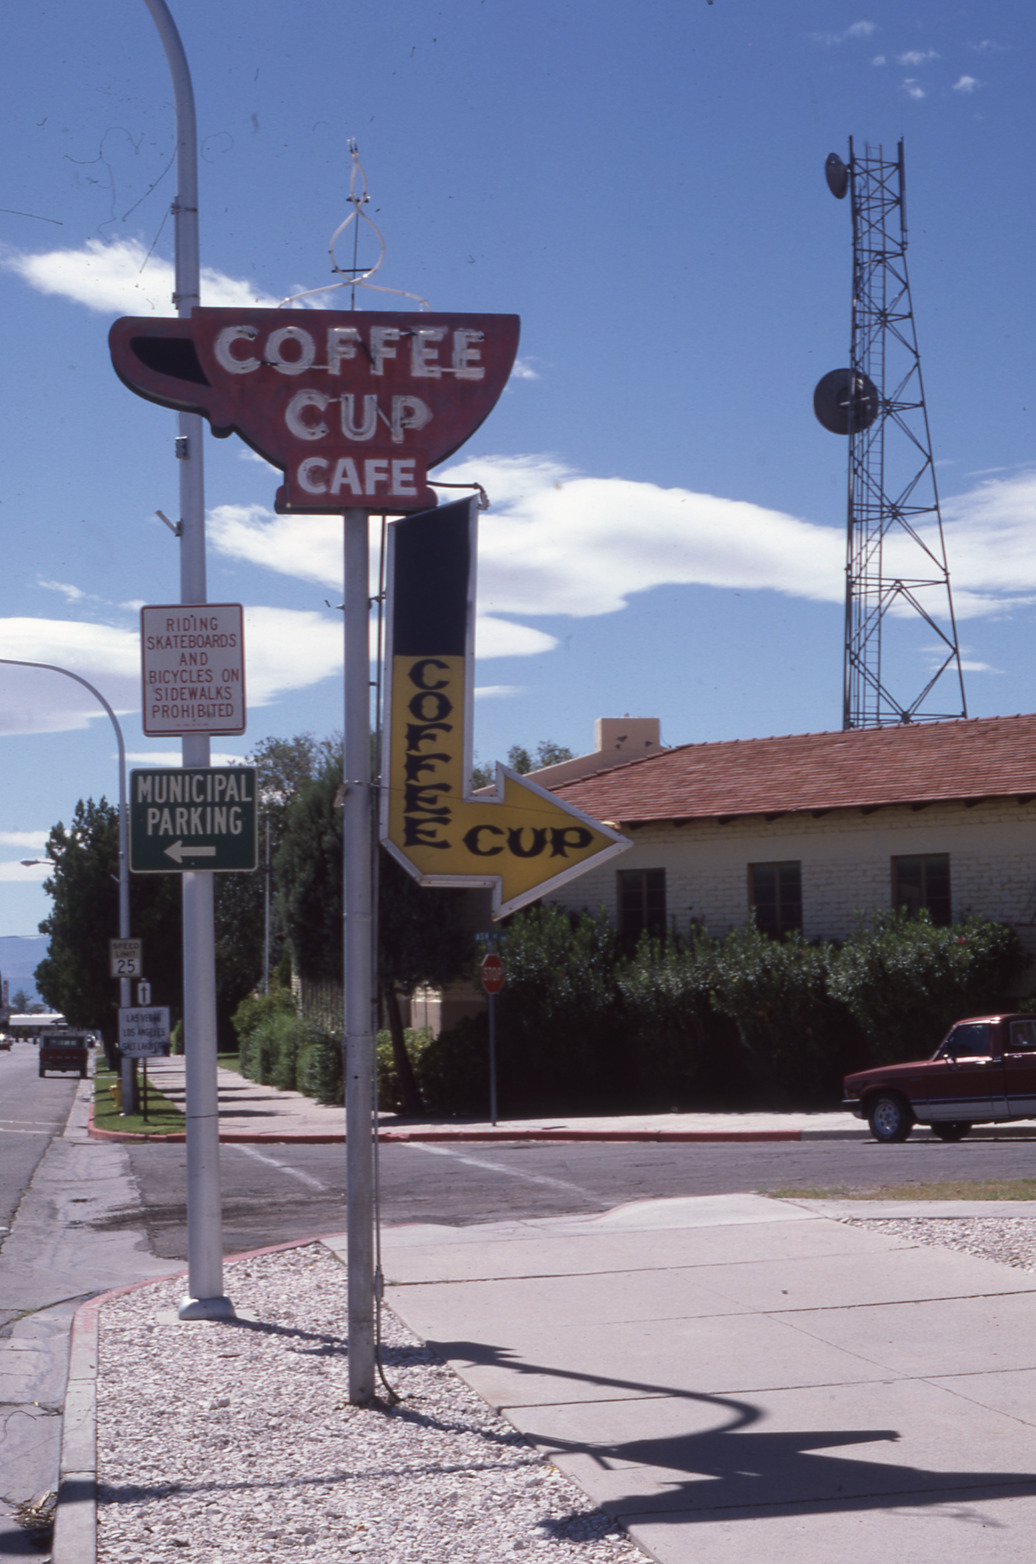 Coffee Cup Cafe flag mounted pylon sign, Boulder City, Nevada: photographic print